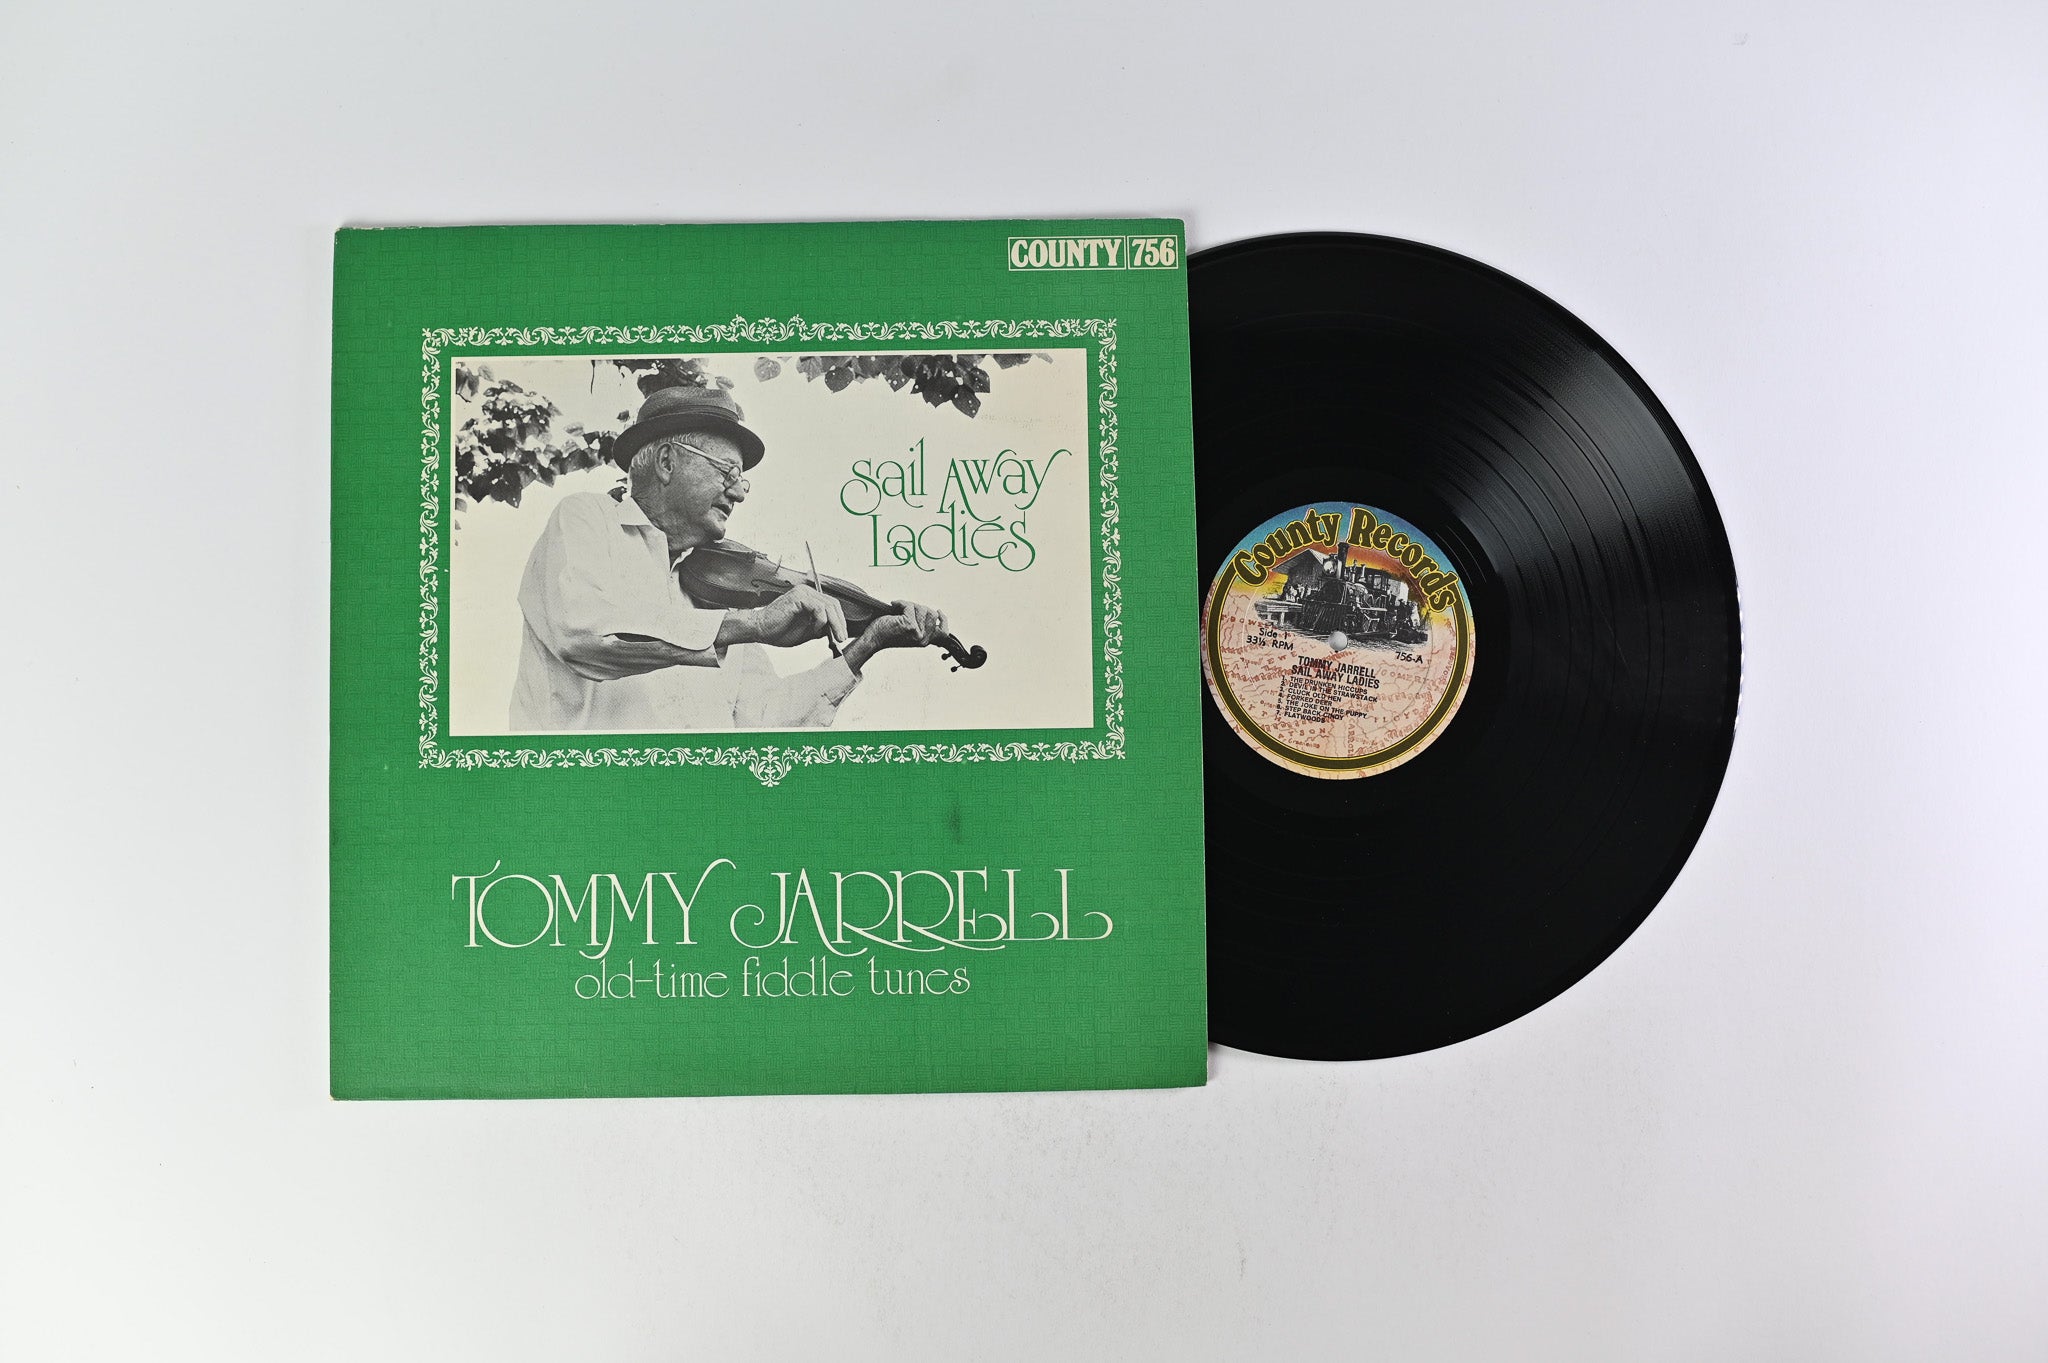 Tommy Jarrell - Sail Away Ladies on County Records